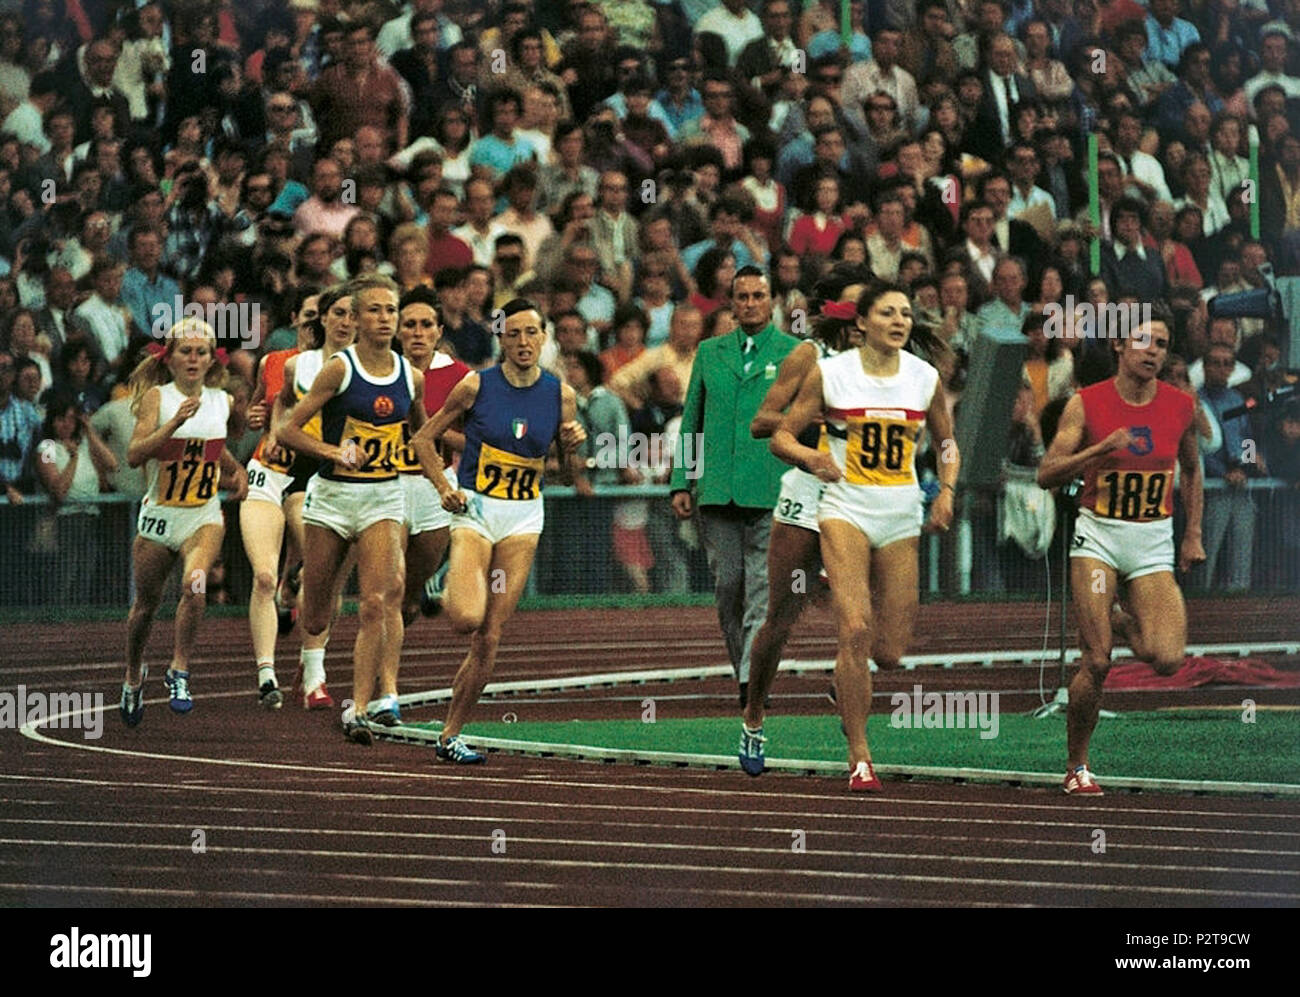 . The Italian middle-distance runner Paola Pigni during the 1500 meters final race. She eventually finished third and won a bronze medal. Next to her, from the left, Ilja Keizer-Laman and Berny Boxem-Lenferink (Holland), Jenny Orr (Australia), Karin Burneleit (East Germany), Tamara Pangelova (USSR), Gunhild Hoffmeister (East Germany) e Sheila Taylor-Carey (UK). On the right, hardly visible, the winner of the race, Lyudmila Bragina (USSR). Munich, September 9, 1972. 7 Jennifer Orr 96 Sheila Carey, 124 Karin Krebs, 132 Gunhild Hoffmeister, 178 Ellen Tittel, 188 Berny Boxem, 189 Ilja Keizer-Laman Stock Photo